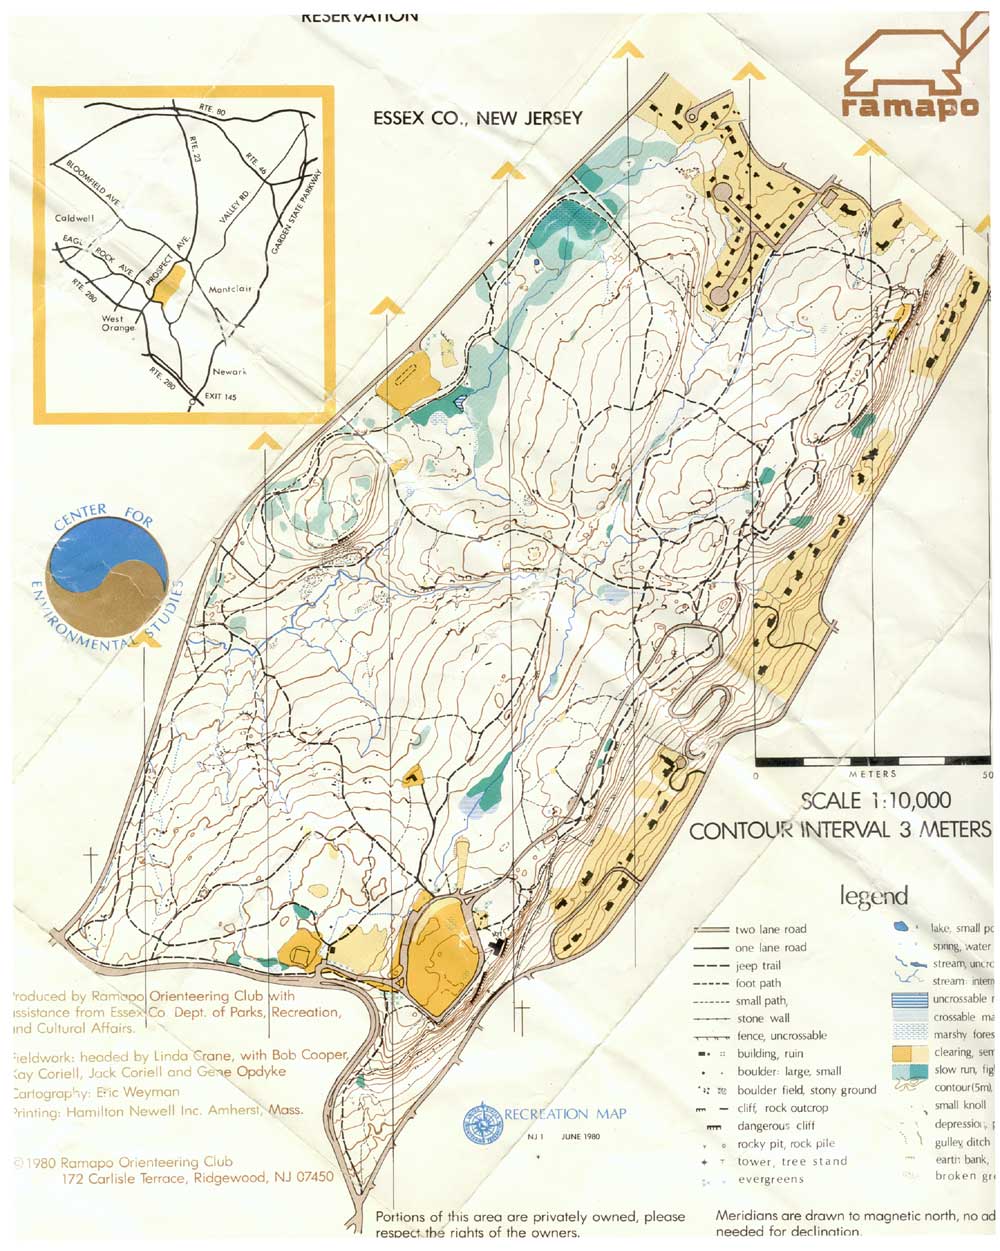 Recreational map of Eagle Rock Reservation by the Ramapo Orienteering Club, June 1980